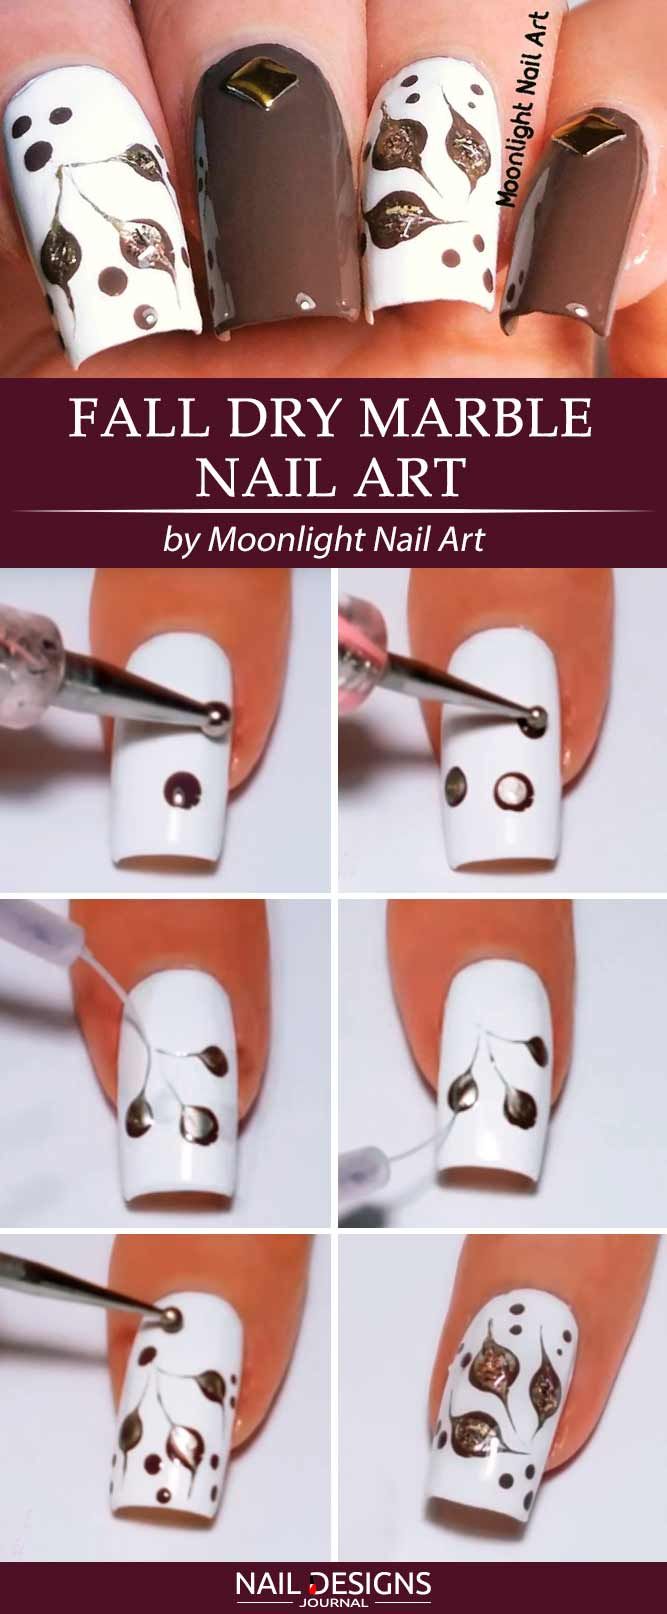 [ad_1]

Dry MarbleE Autumn Nail Art #diynailart #autumnnaila
Source by jentje1
[ad_2]
			
			…